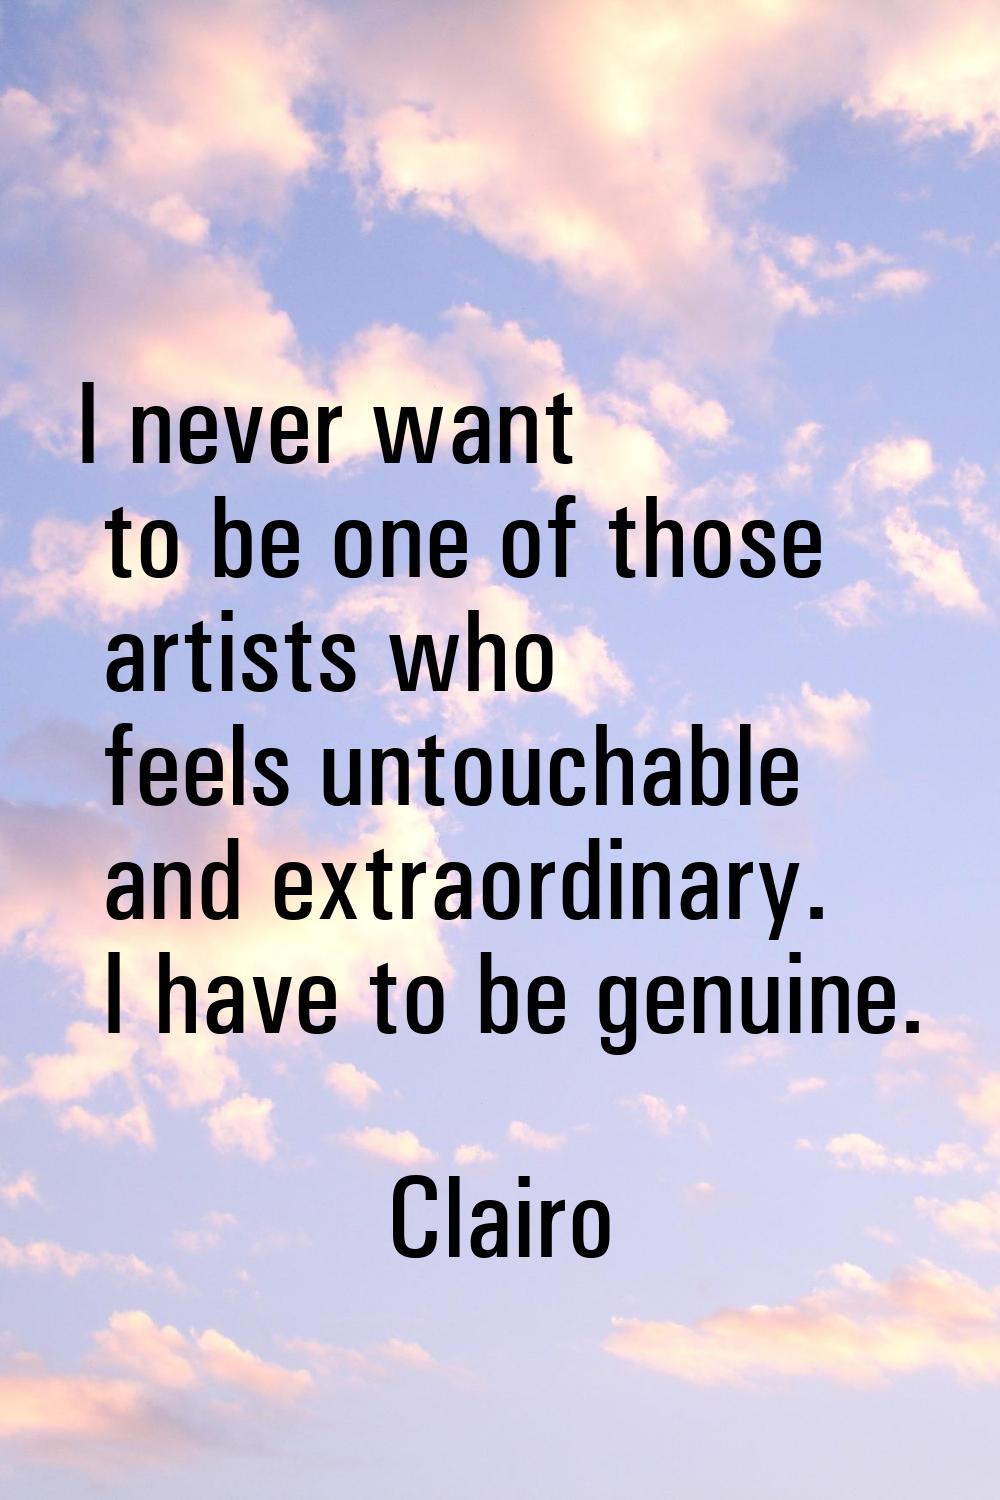 I never want to be one of those artists who feels untouchable and extraordinary. I have to be genui